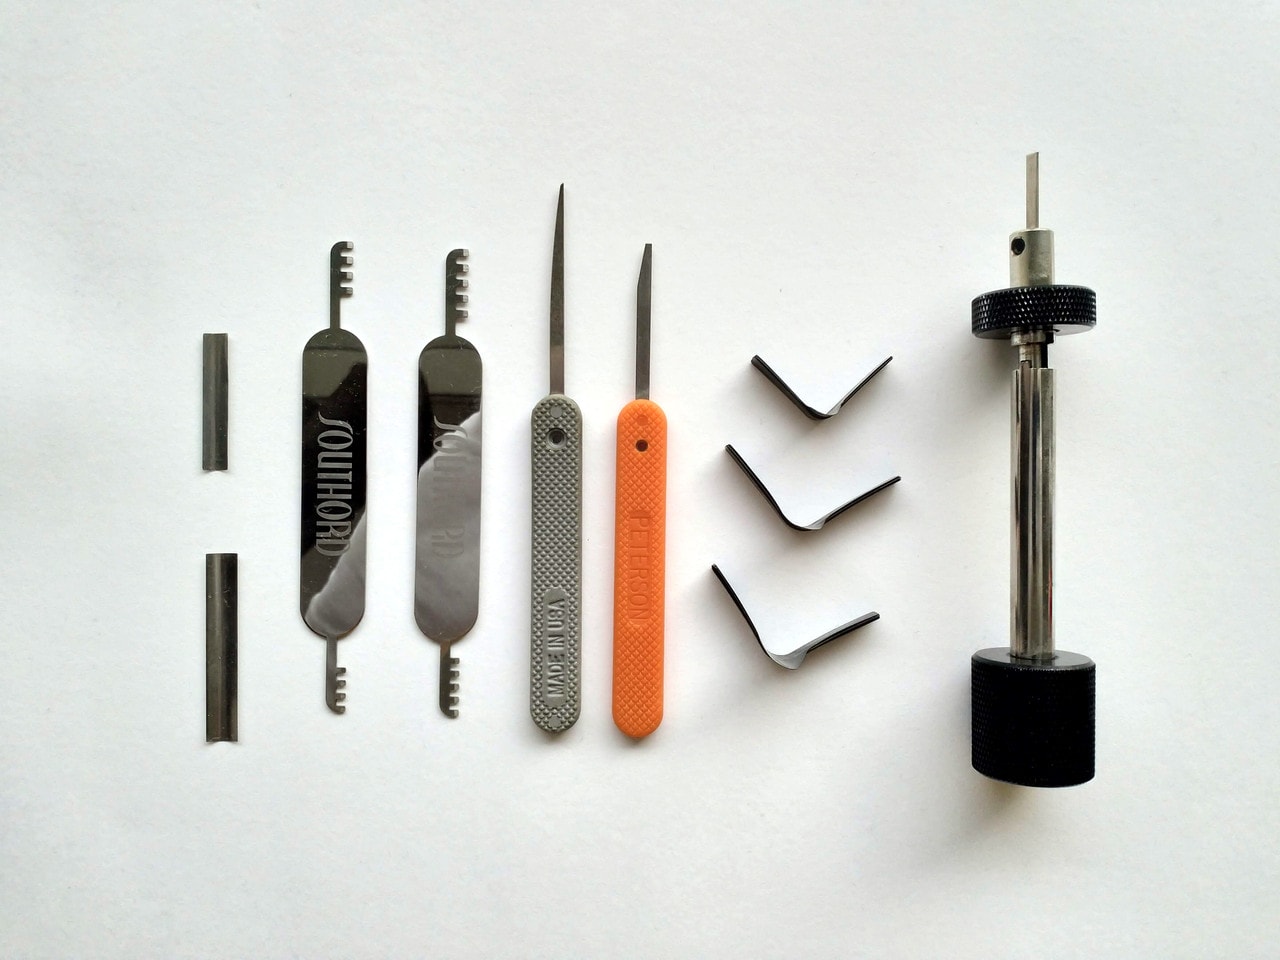 Lock Picking: A Beginner's Guide to Covert Entry